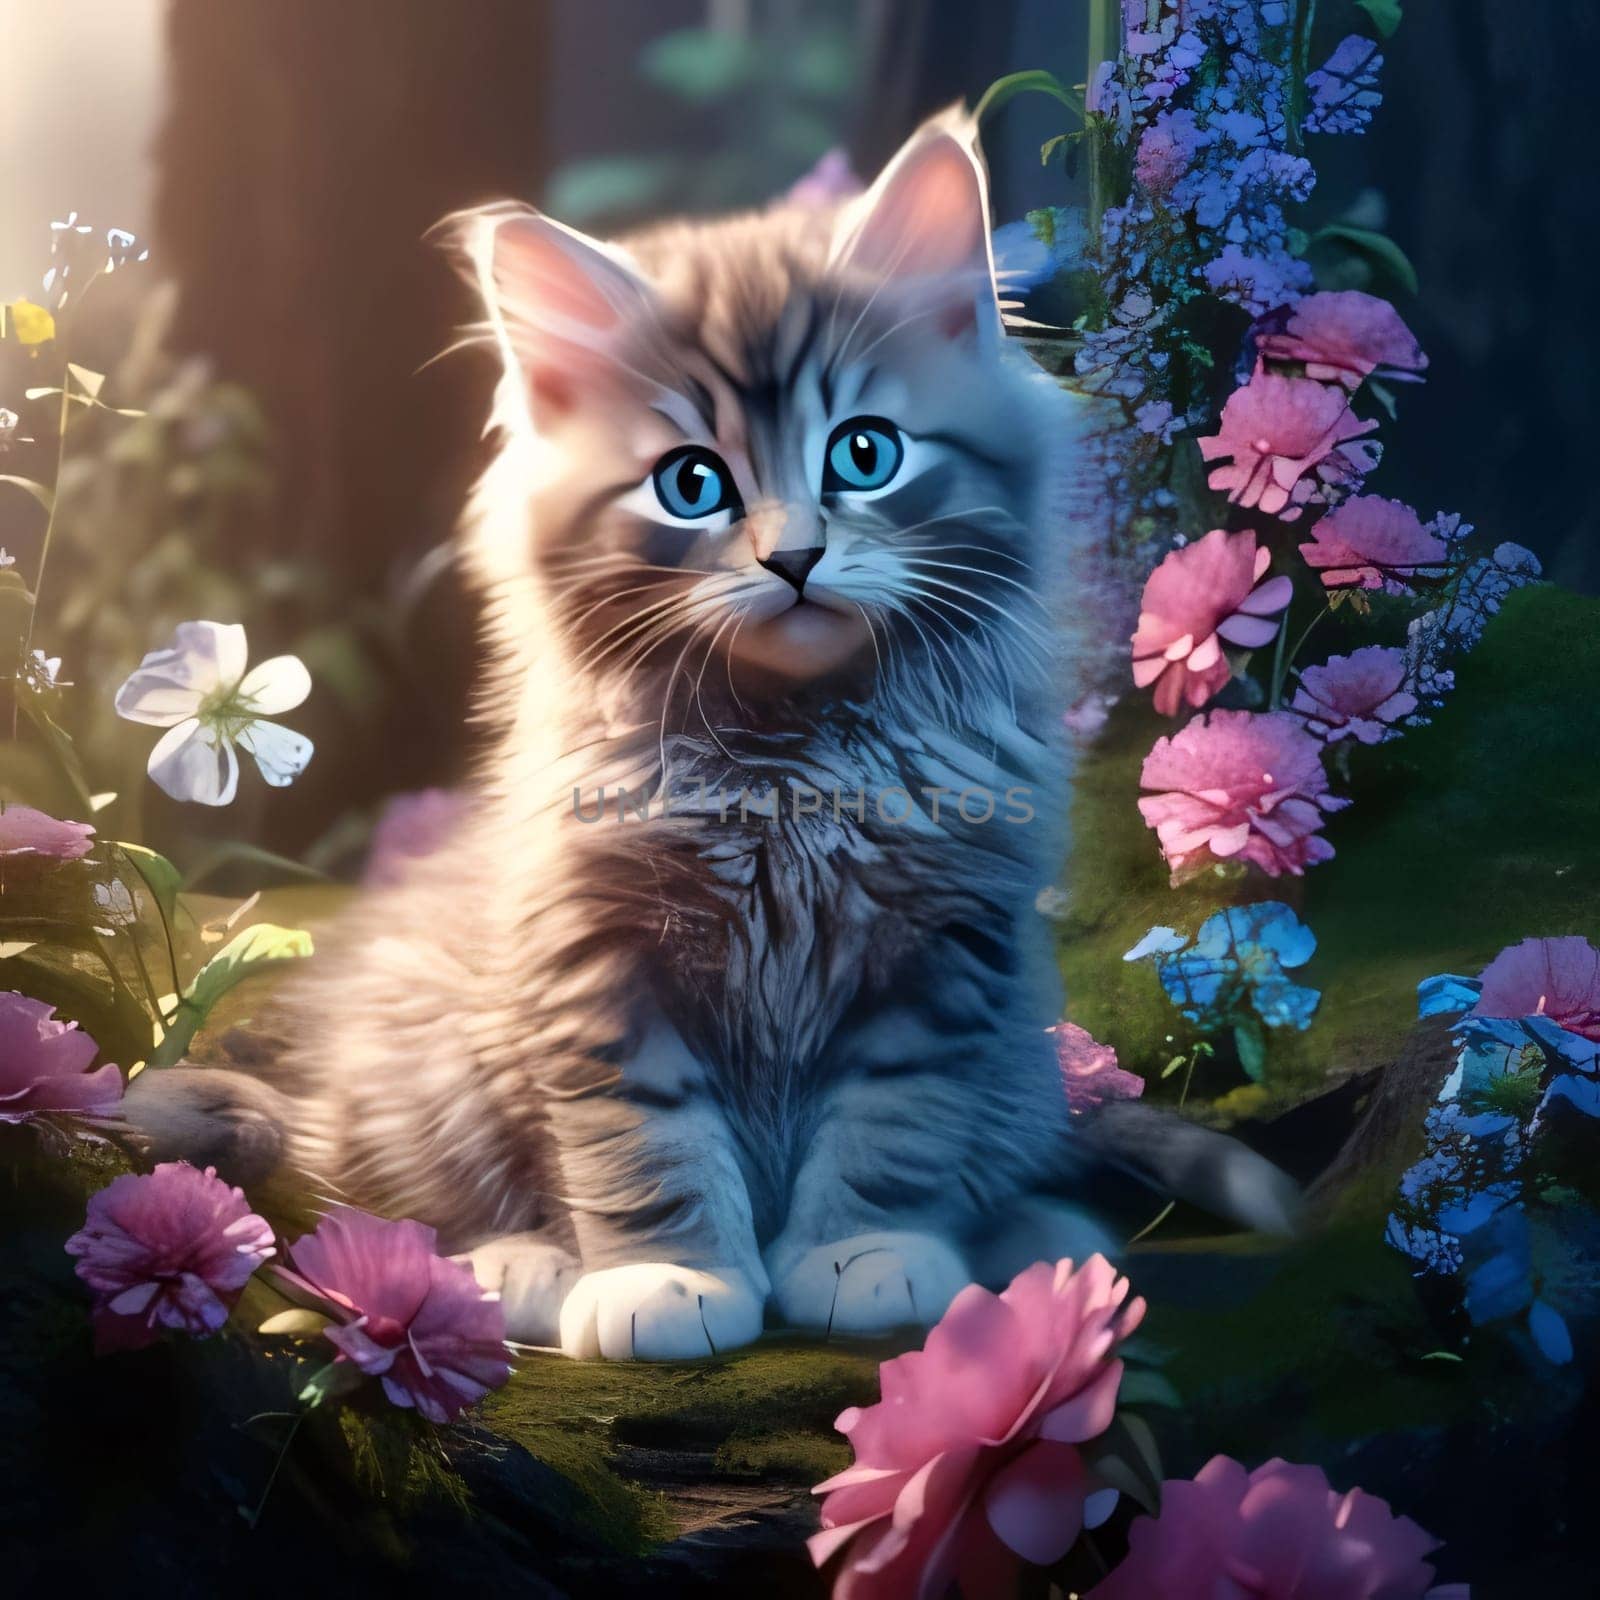 Illustration of a tiny kitten around pink and blue flowers. Flowering flowers, a symbol of spring, new life. A joyful time of nature waking up to life.